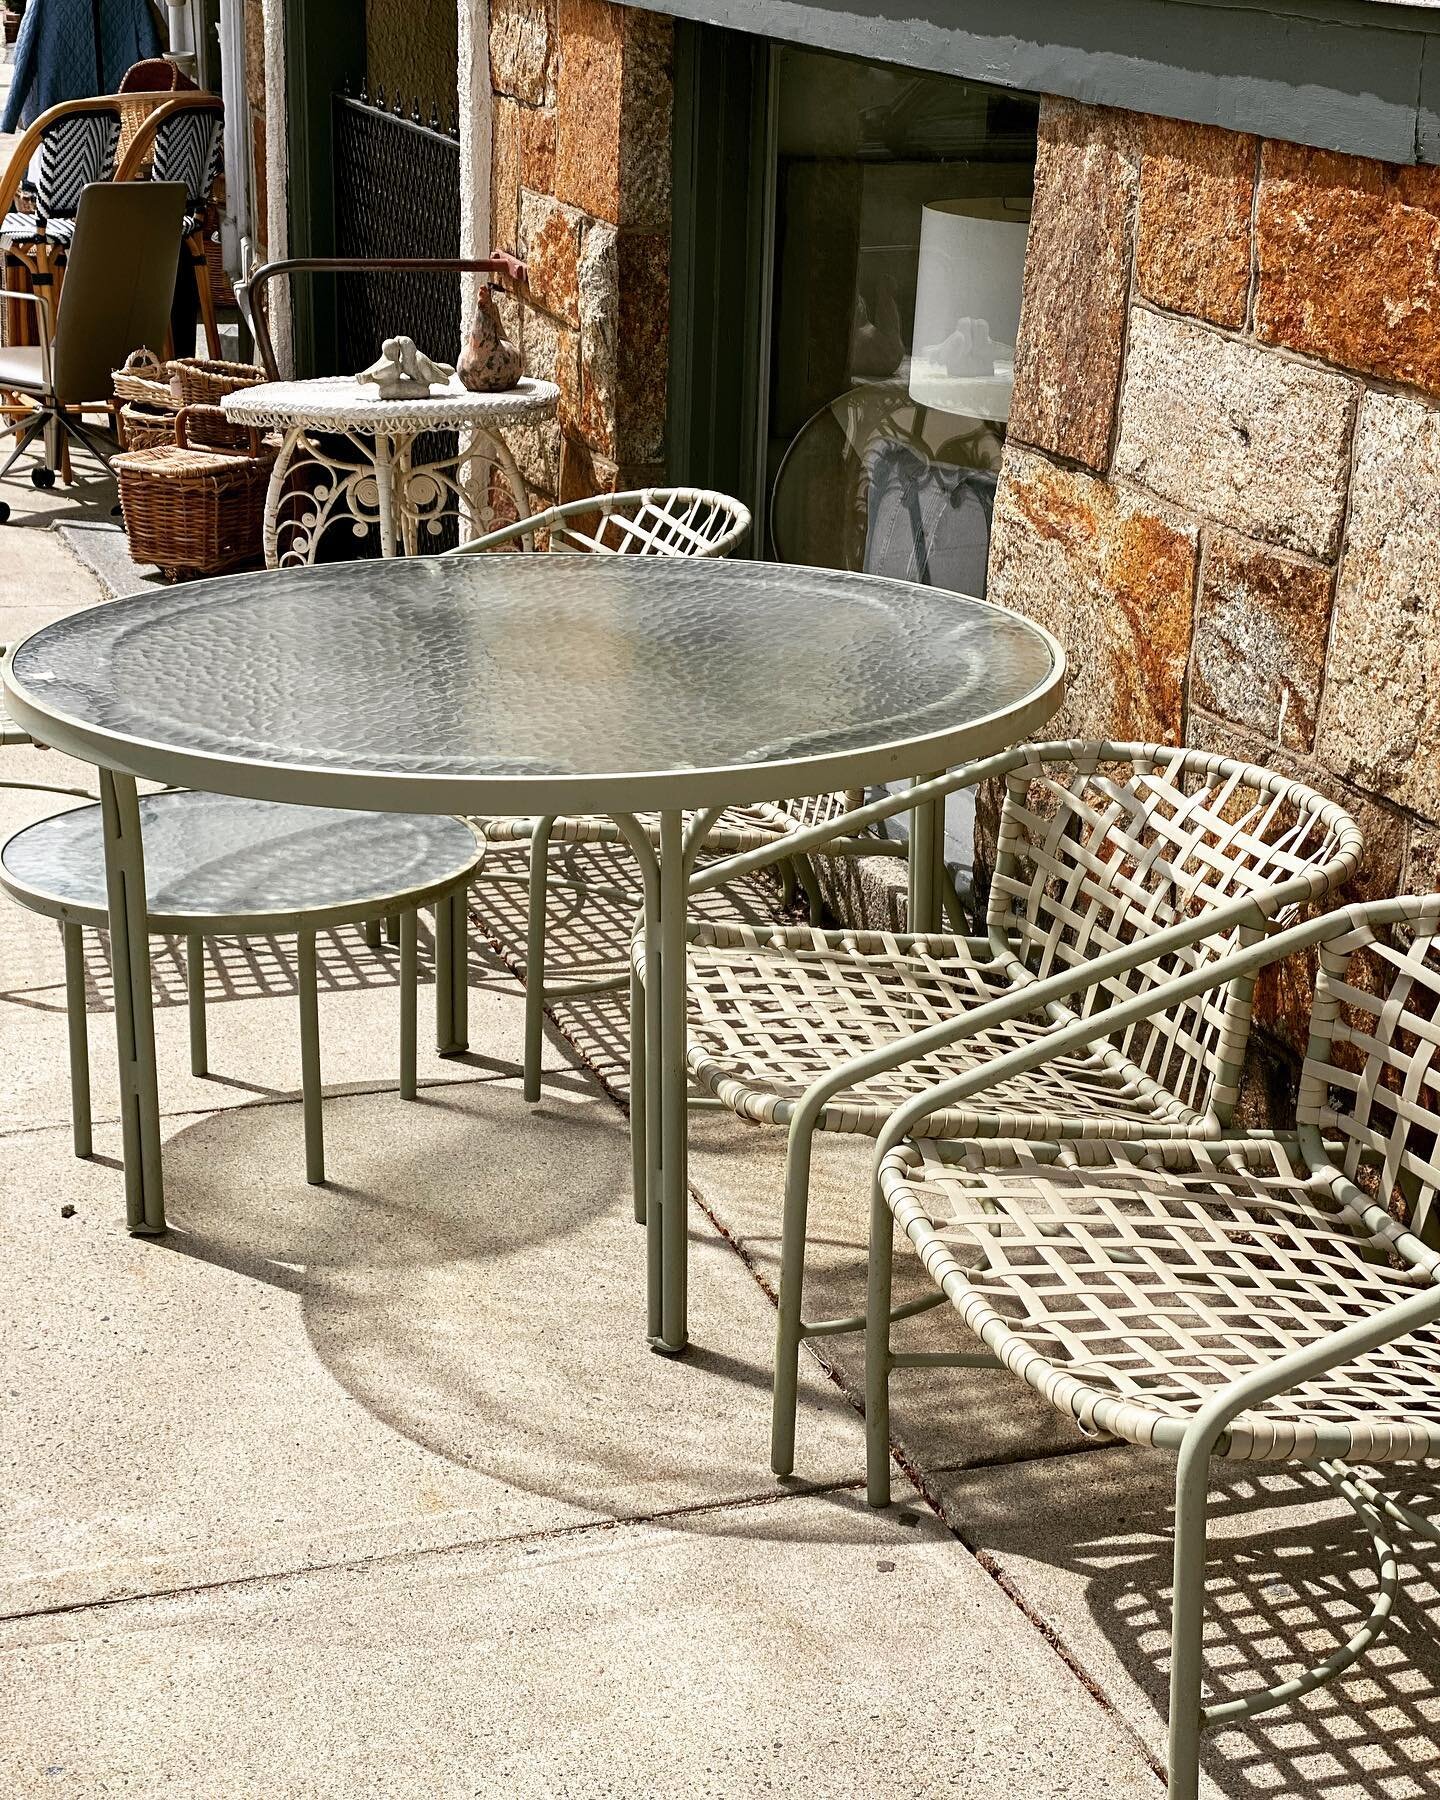 Spring has sprung - the time for outdoor dining has finally arrived. Eat/lounge in style with this beautiful MCM Brown Jordan set 🌸 #brownjordan #brownjordanloungers #tadaoinouye #brownjordankantan kantan